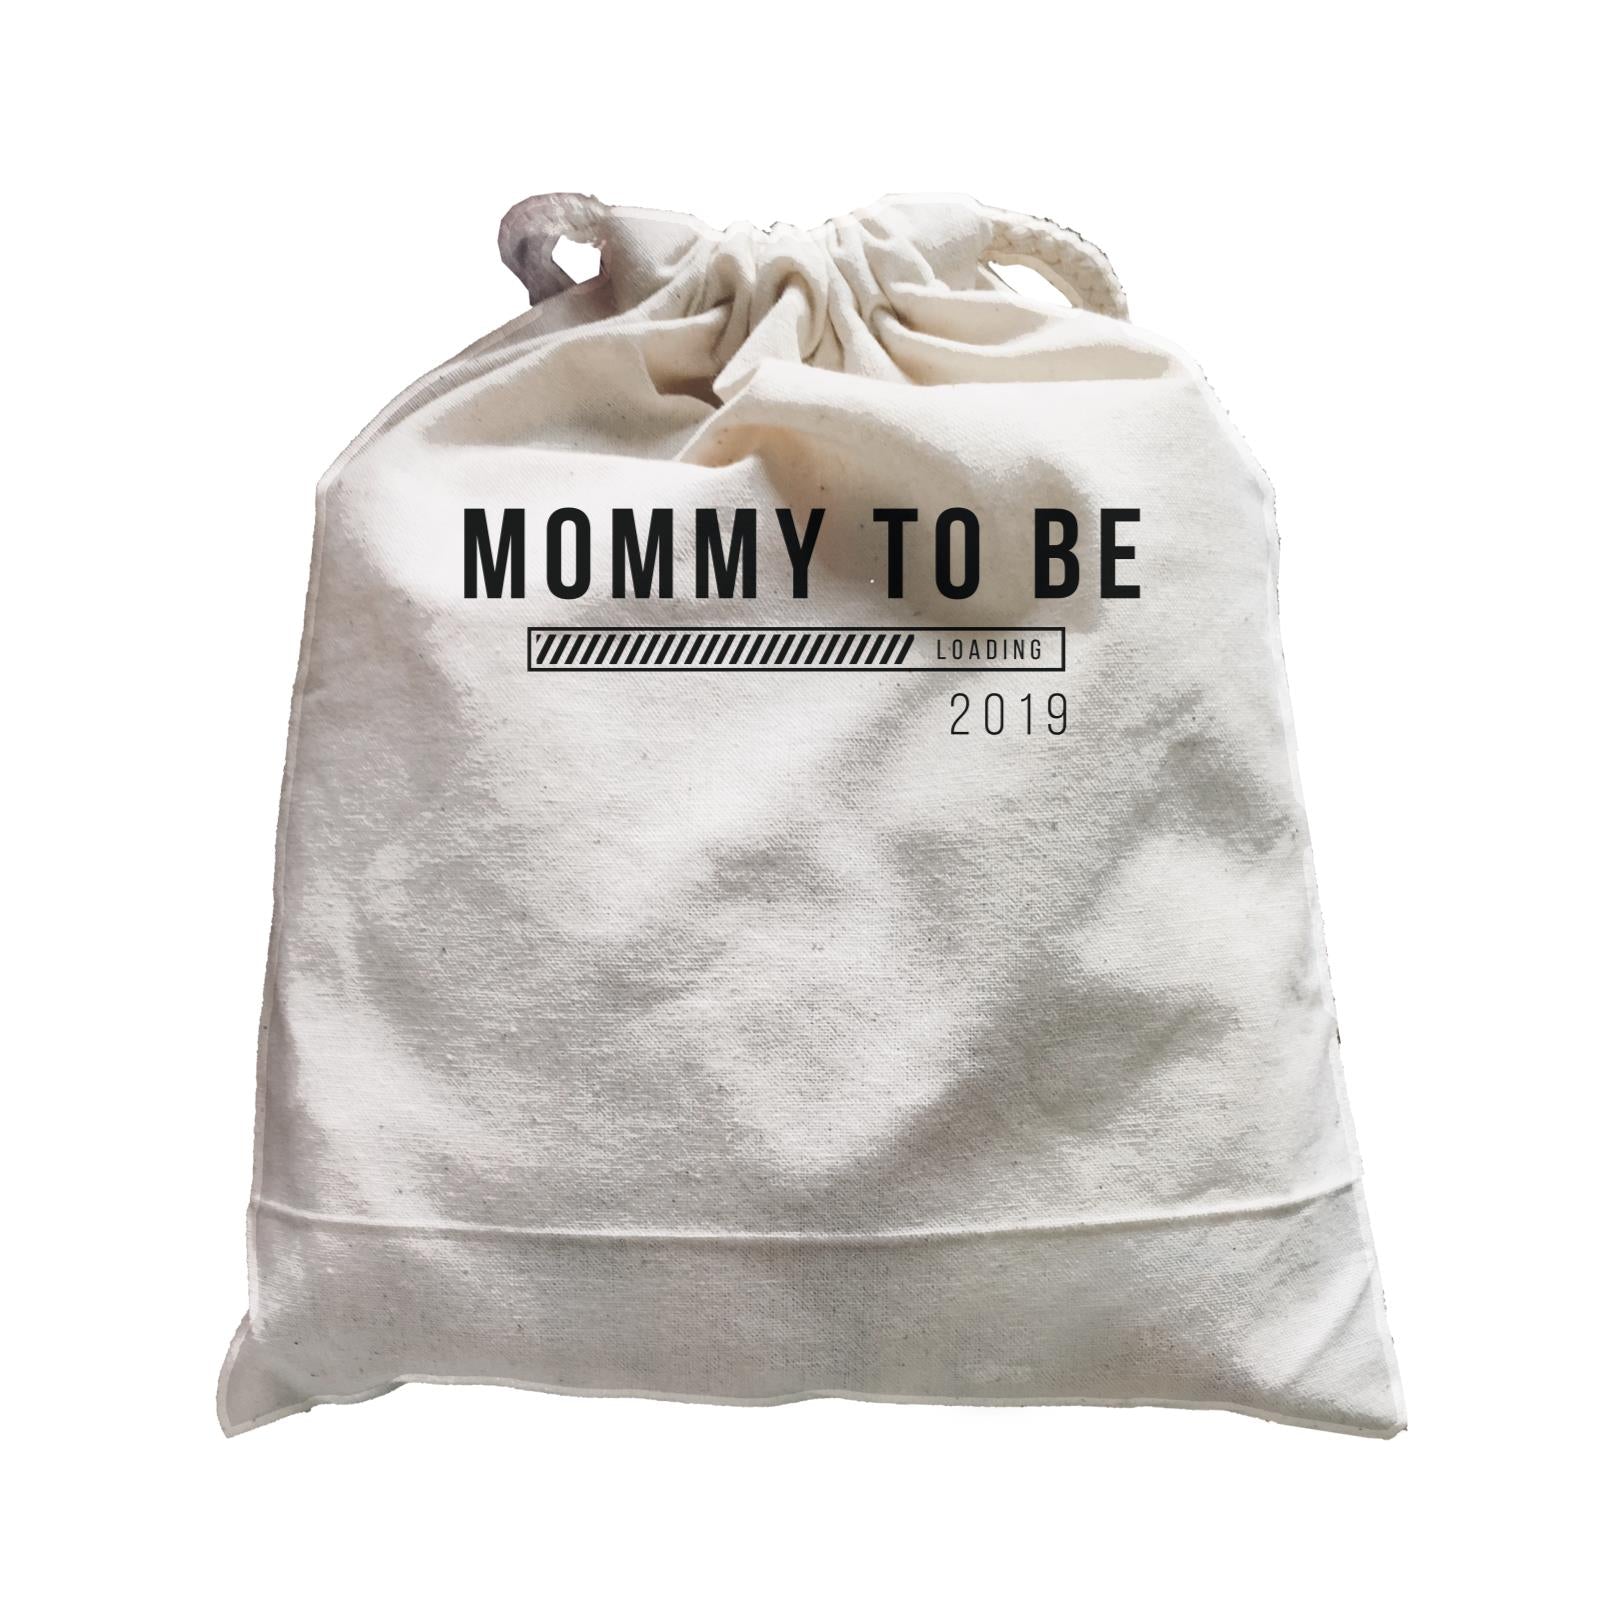 Coming Soon Family Mommy To Be Loading Add Date Satchel